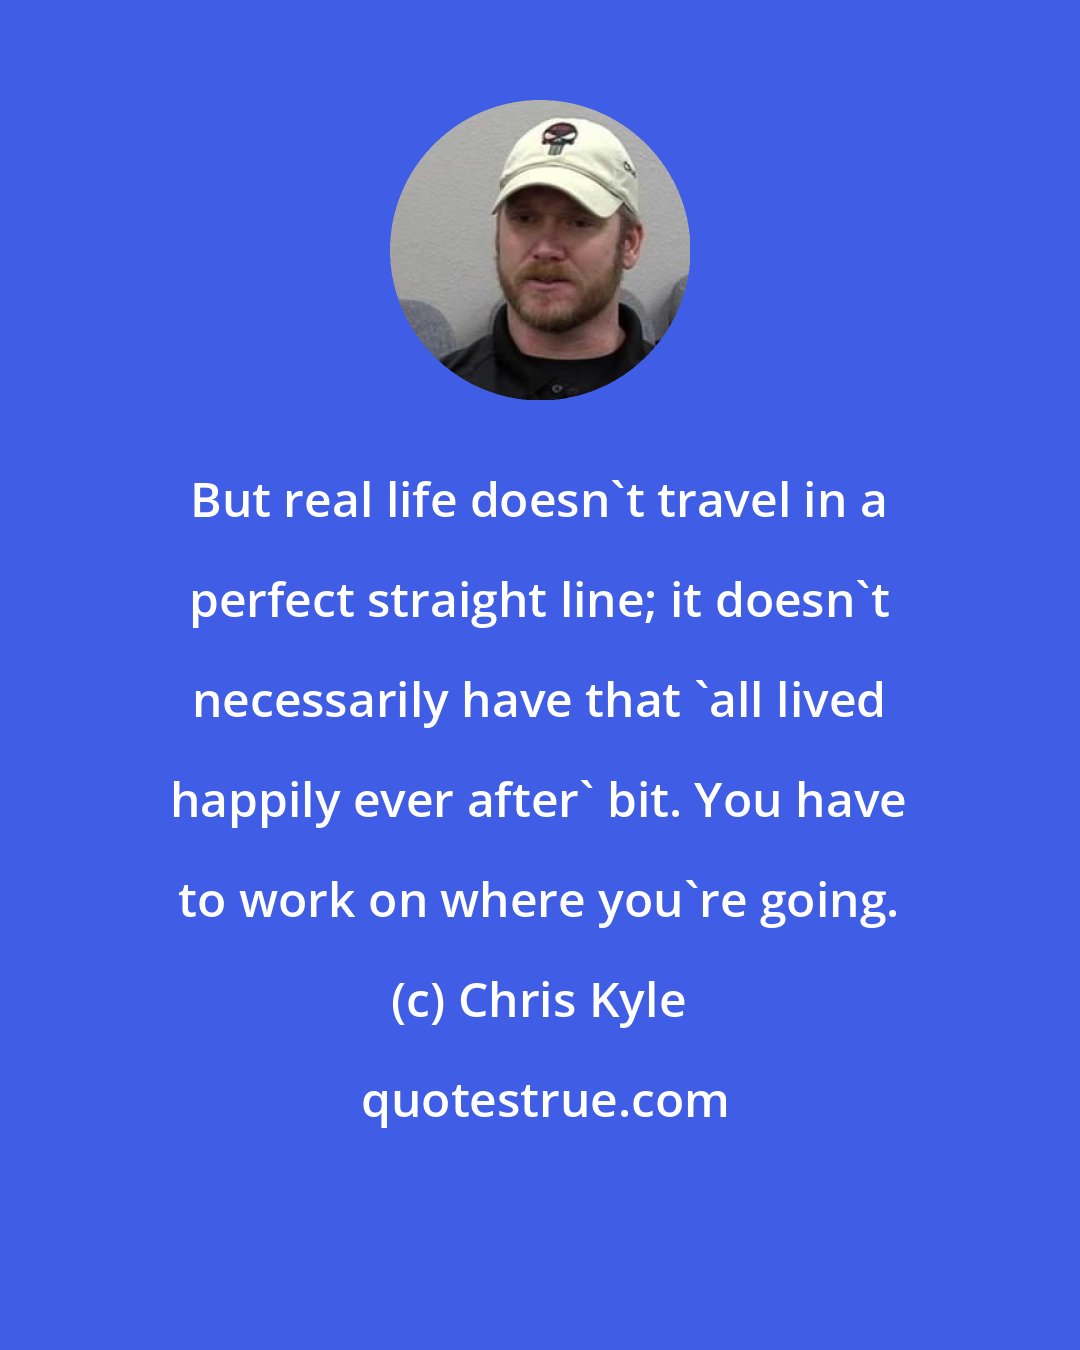 Chris Kyle: But real life doesn't travel in a perfect straight line; it doesn't necessarily have that 'all lived happily ever after' bit. You have to work on where you're going.